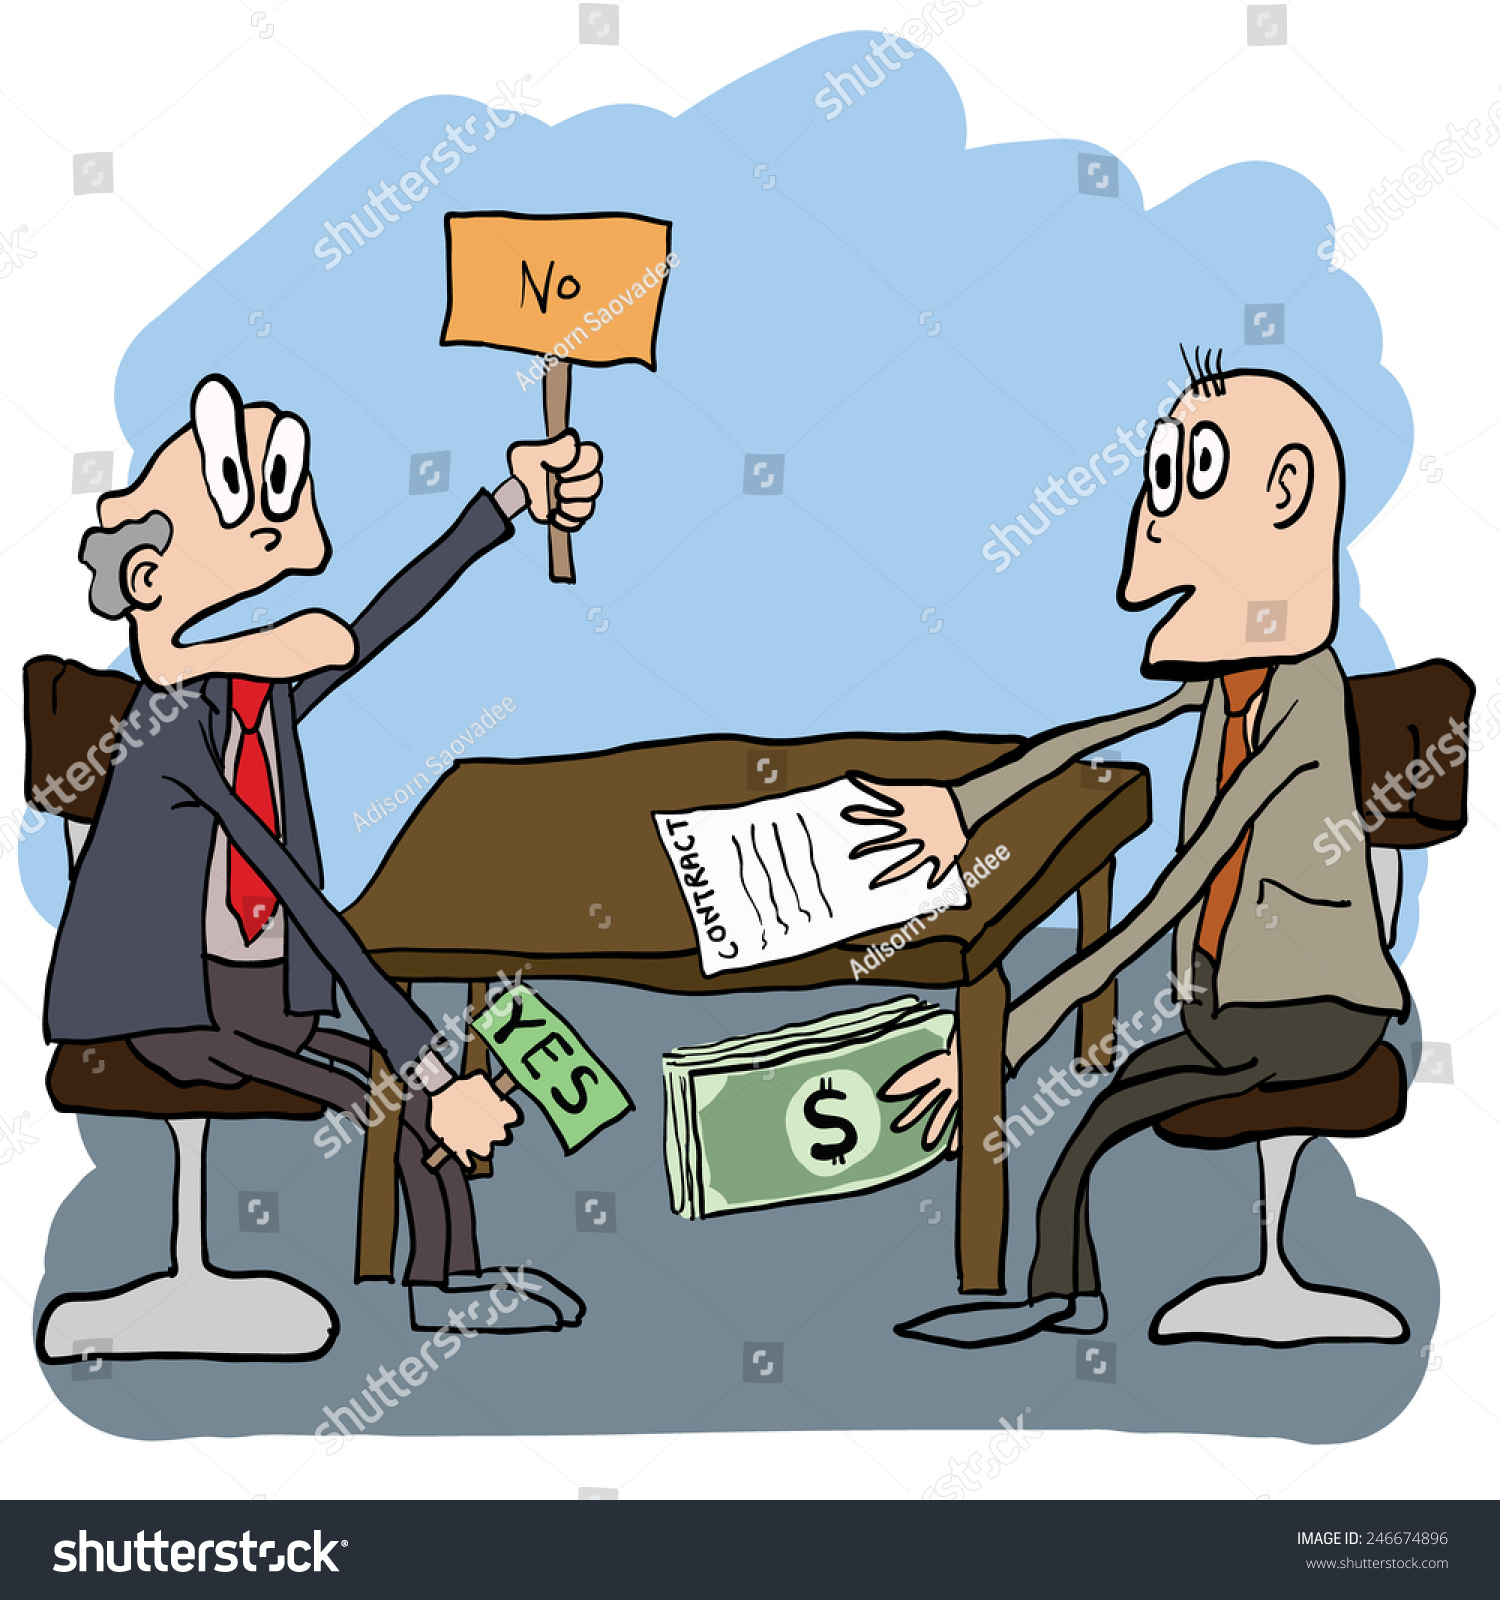 stock-vector-corruption-giving-money-under-the-table-246674896.jpg